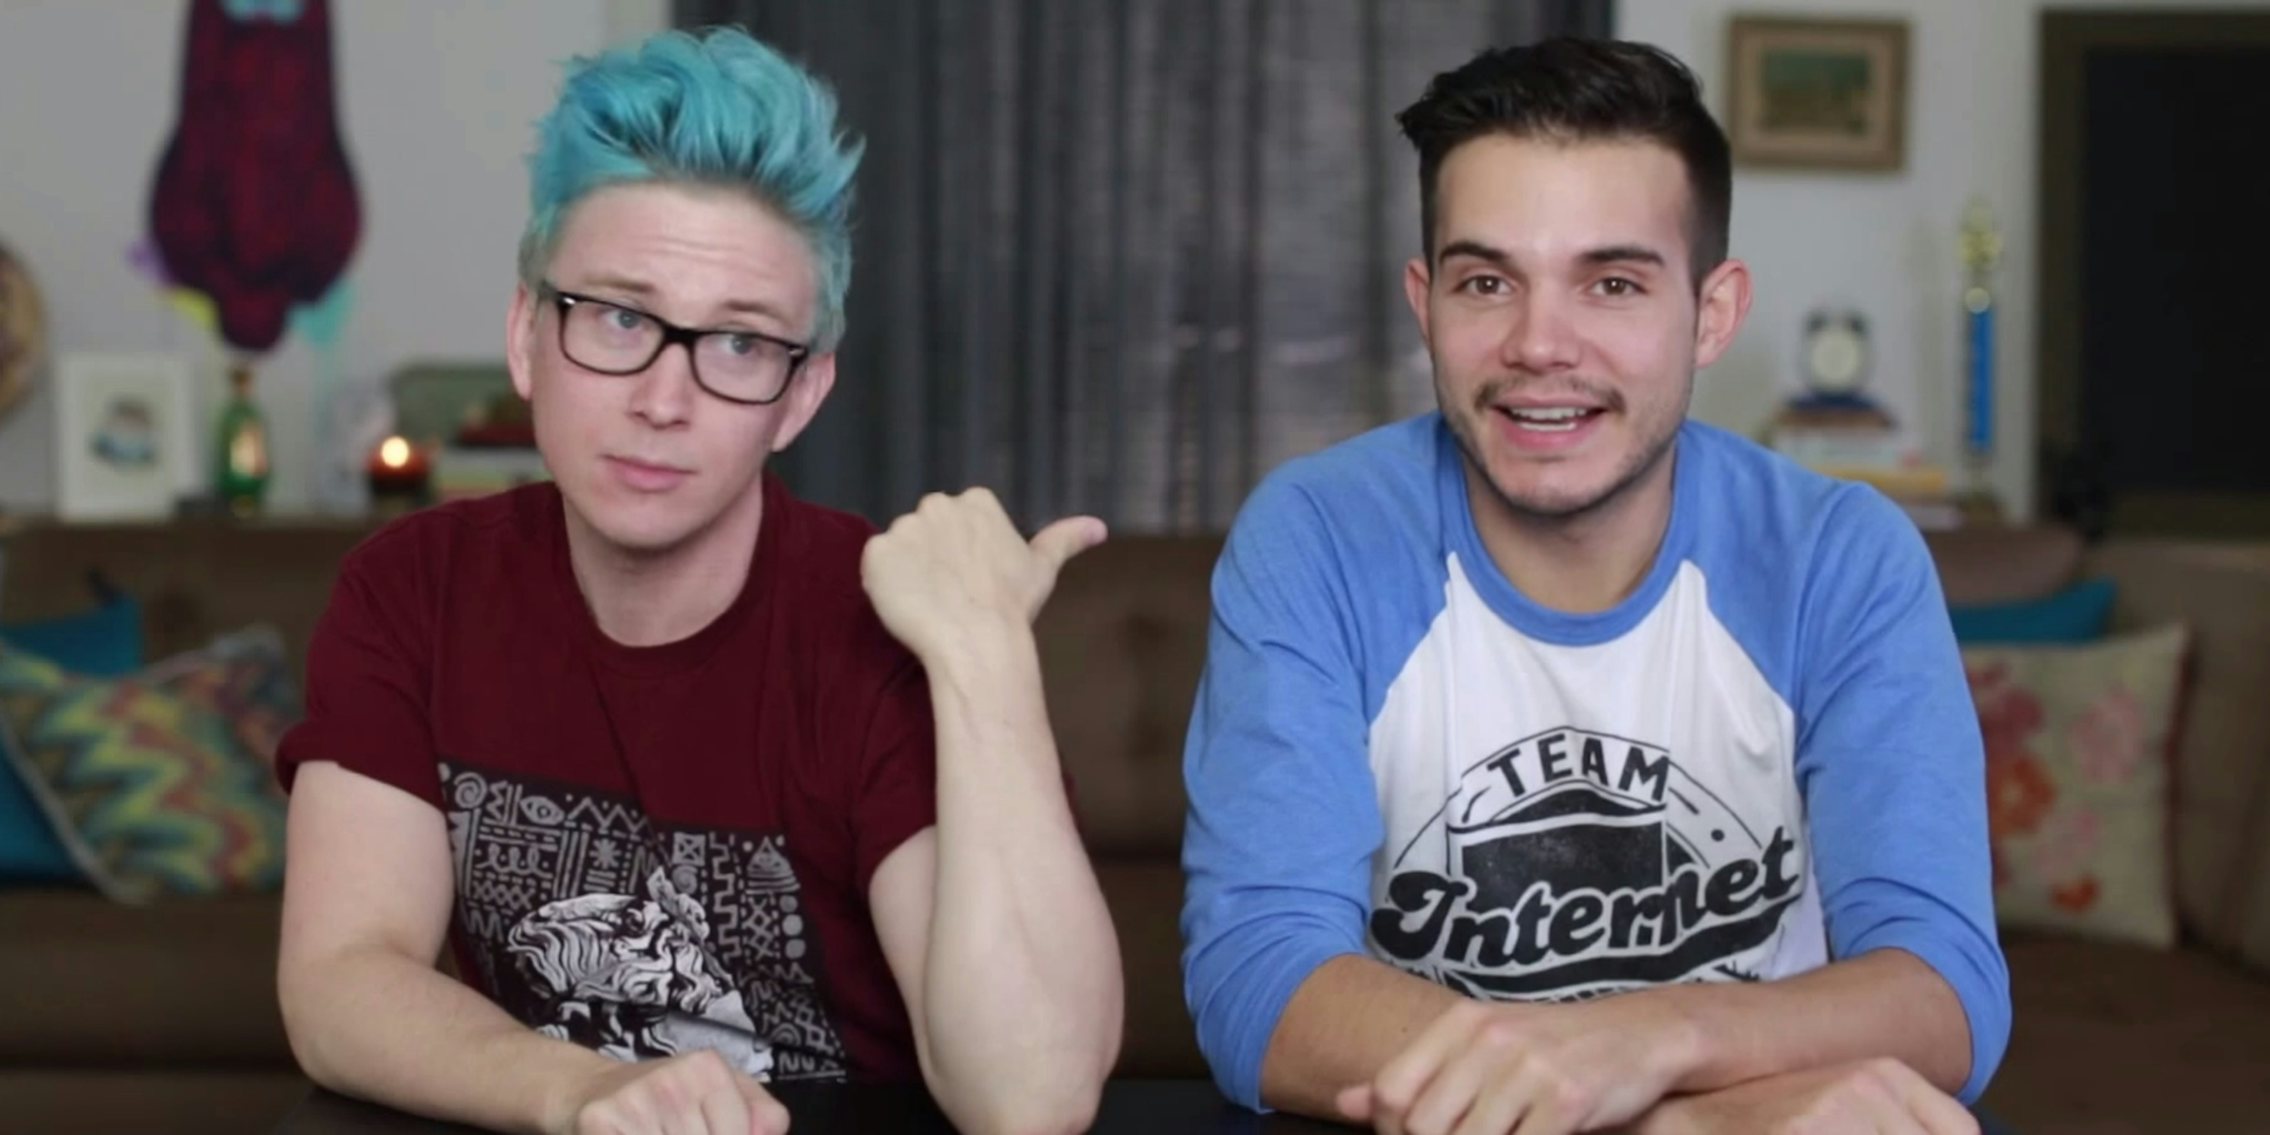 The Amazing Race' casts Tyler Oakley and other Web stars for new season -  The Daily Dot